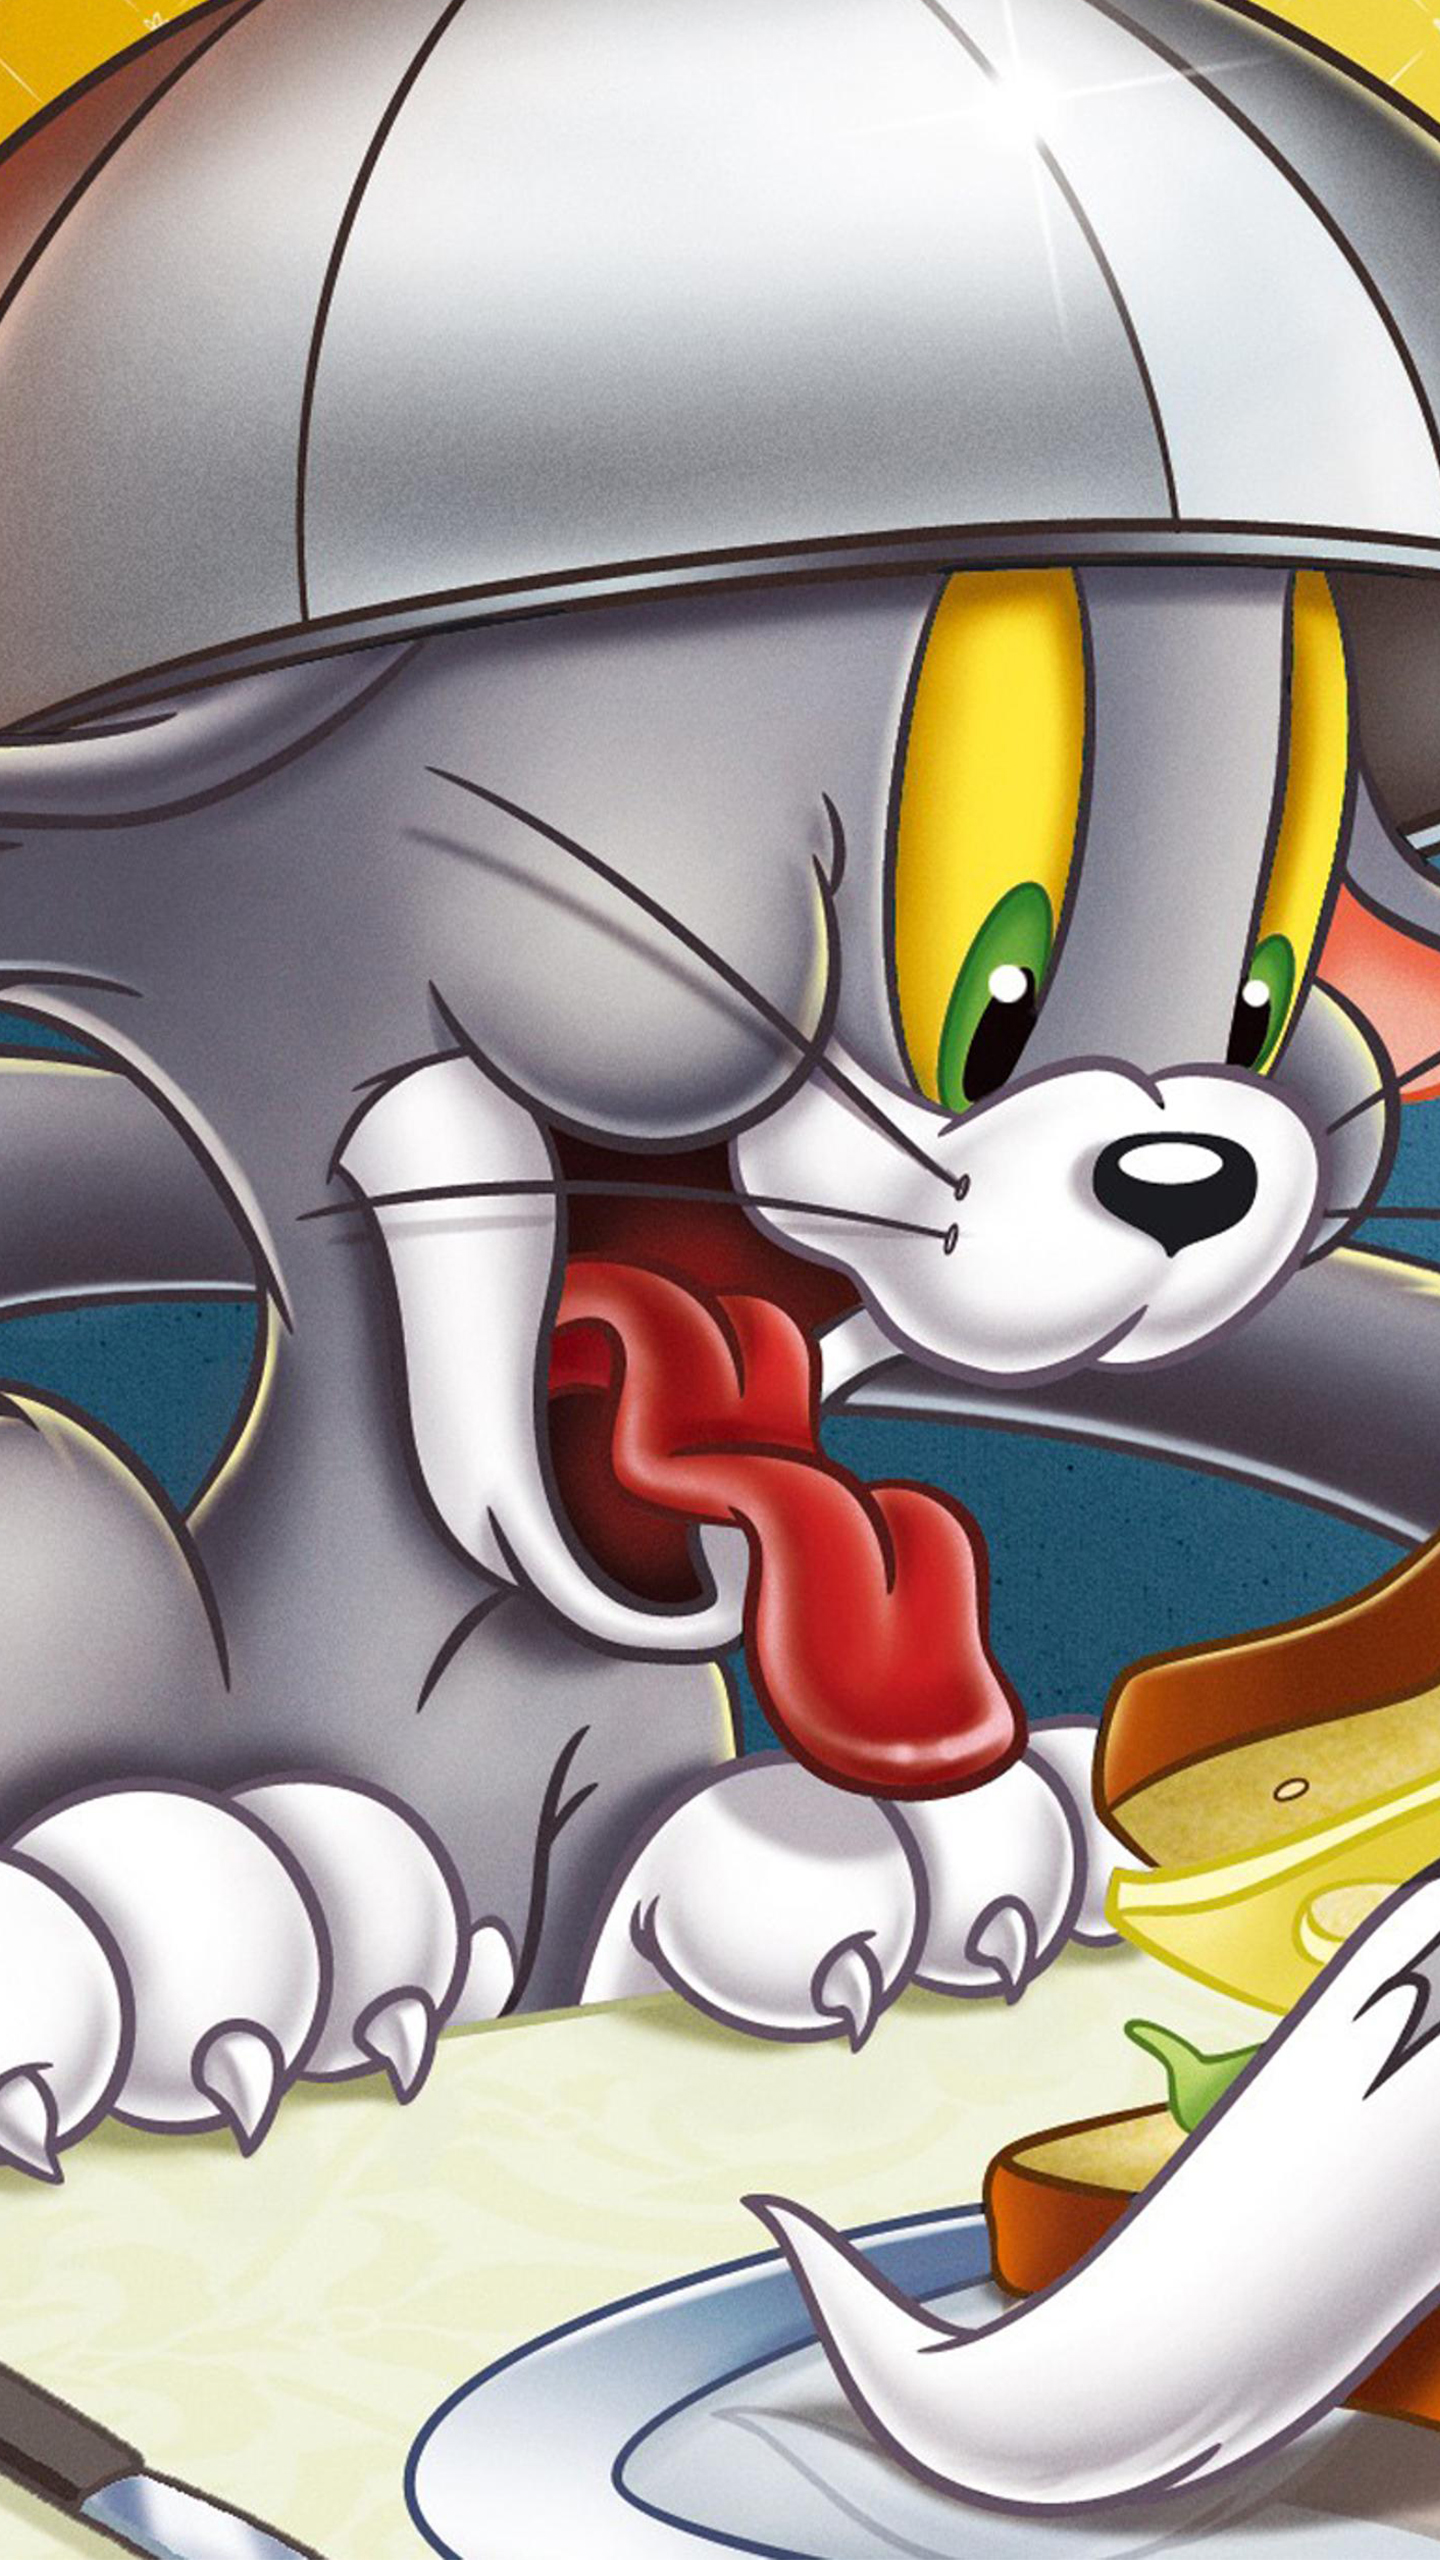 tom-and-jerry-phone-wallpaper-20